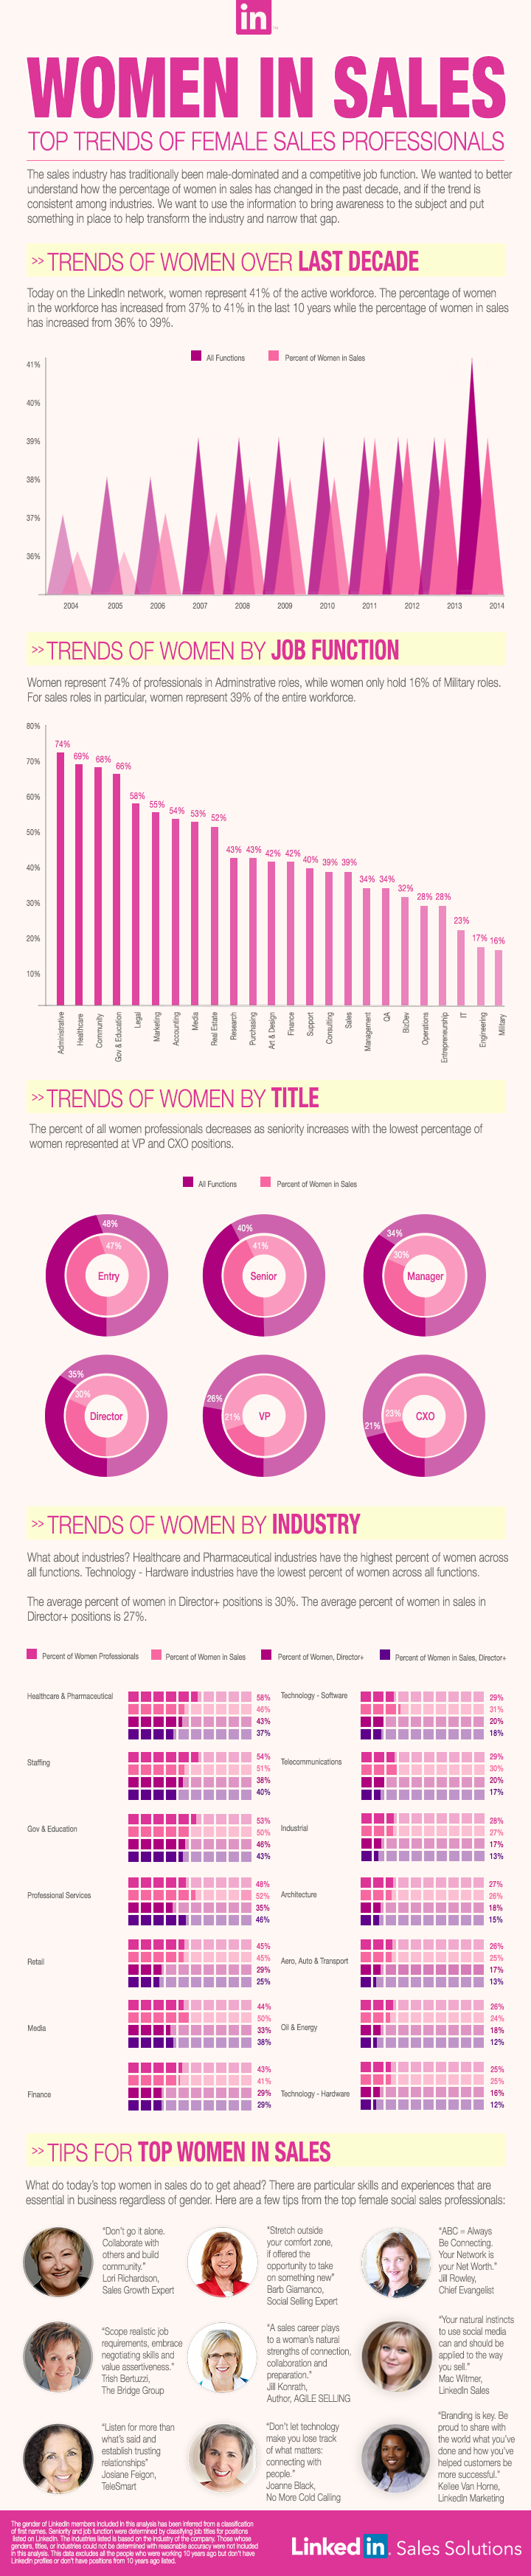 LinkedIn Releases New Trend Data About Women in Sales [Infographic]